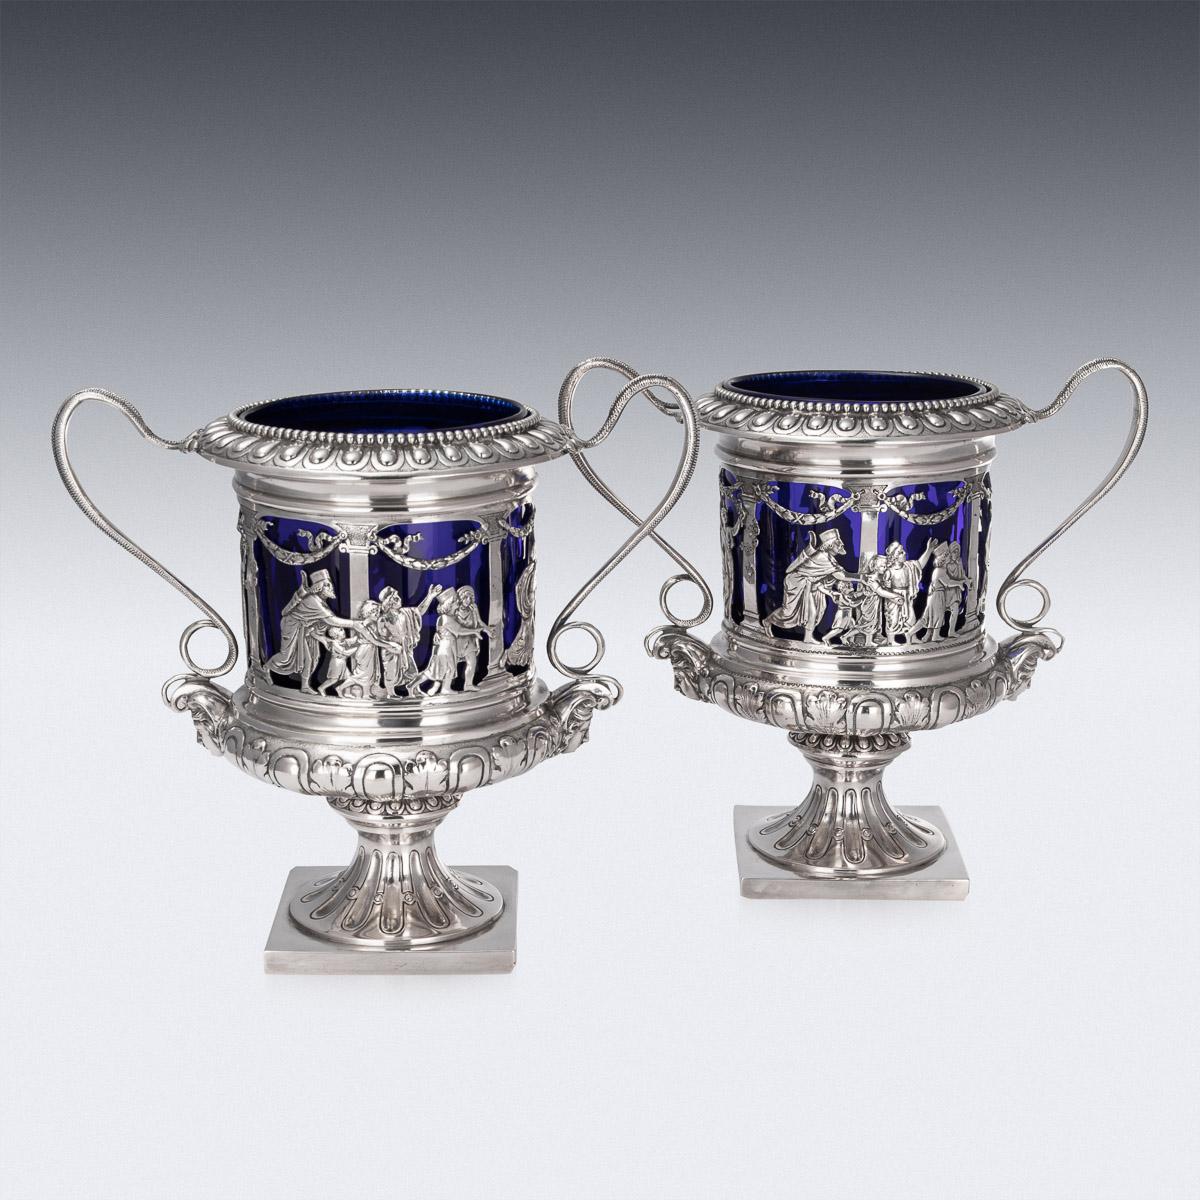 Neoclassical 20th Century German Neo-Classical Solid Silver & Glass Wine Coolers, c.1900